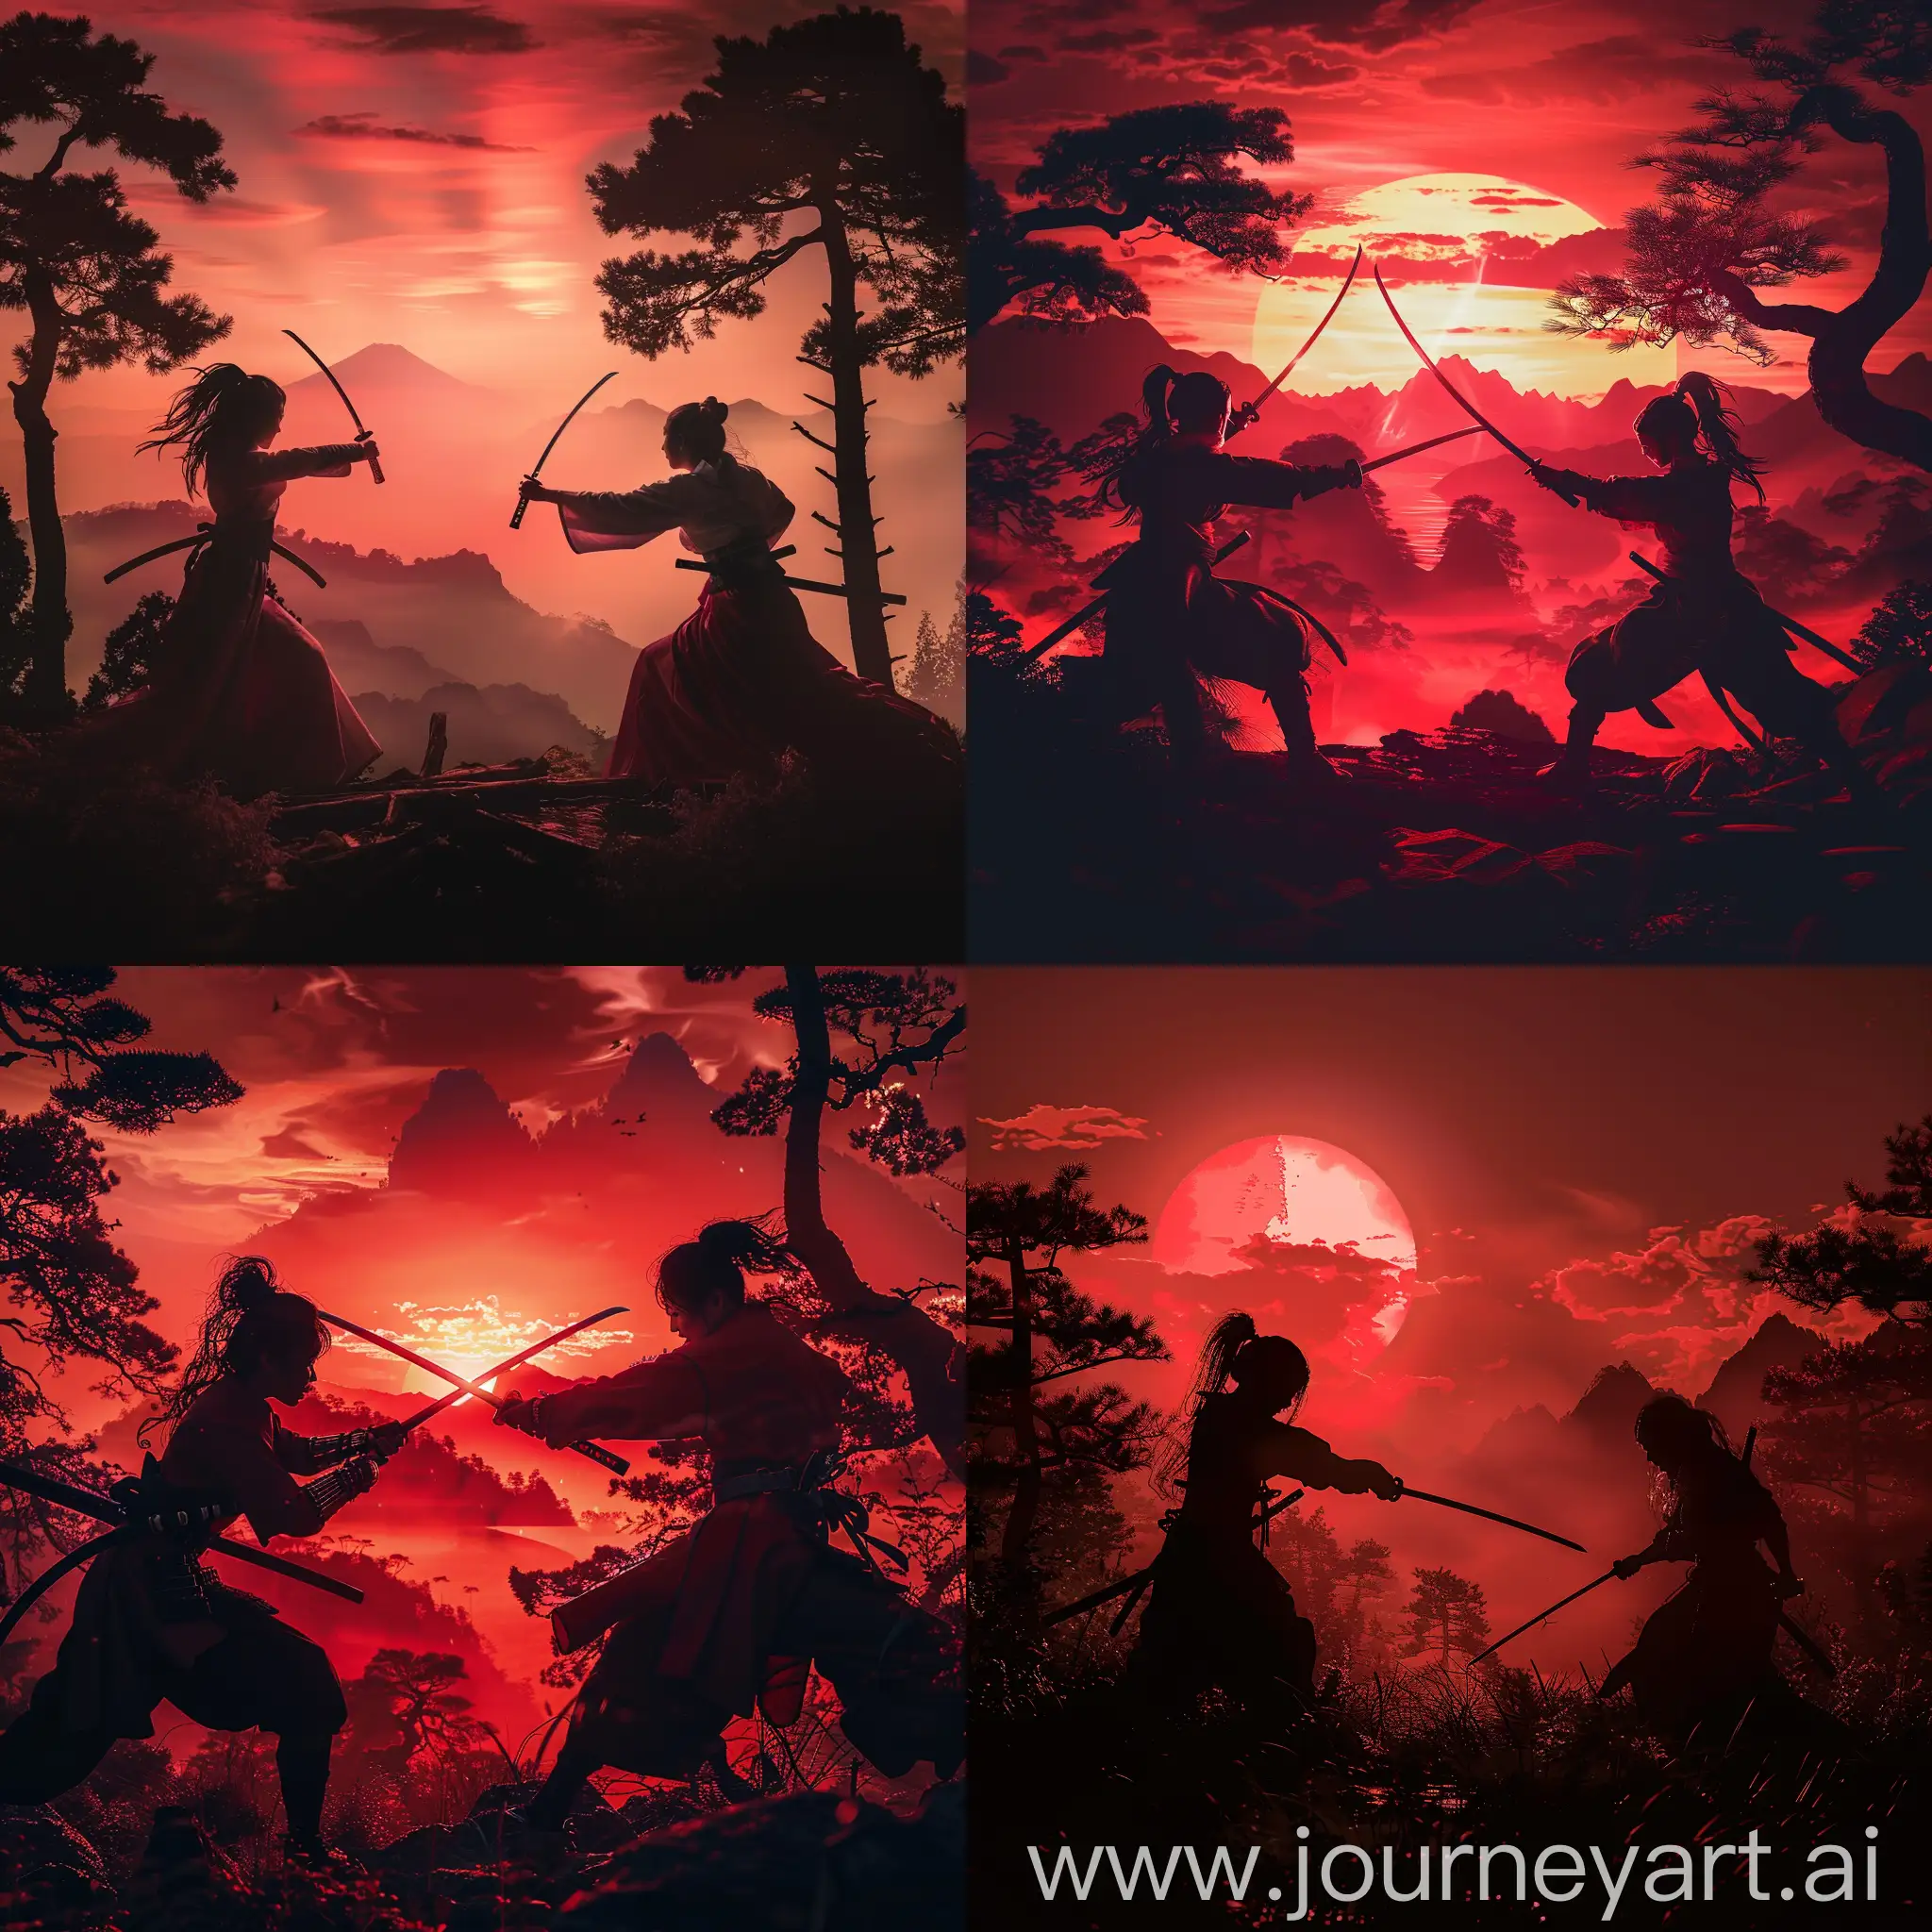 Japanese-Women-Samurai-Sword-Fight-at-Sunset-Among-Silhouetted-Mountains-and-Trees-with-Mysterious-Red-Lighting